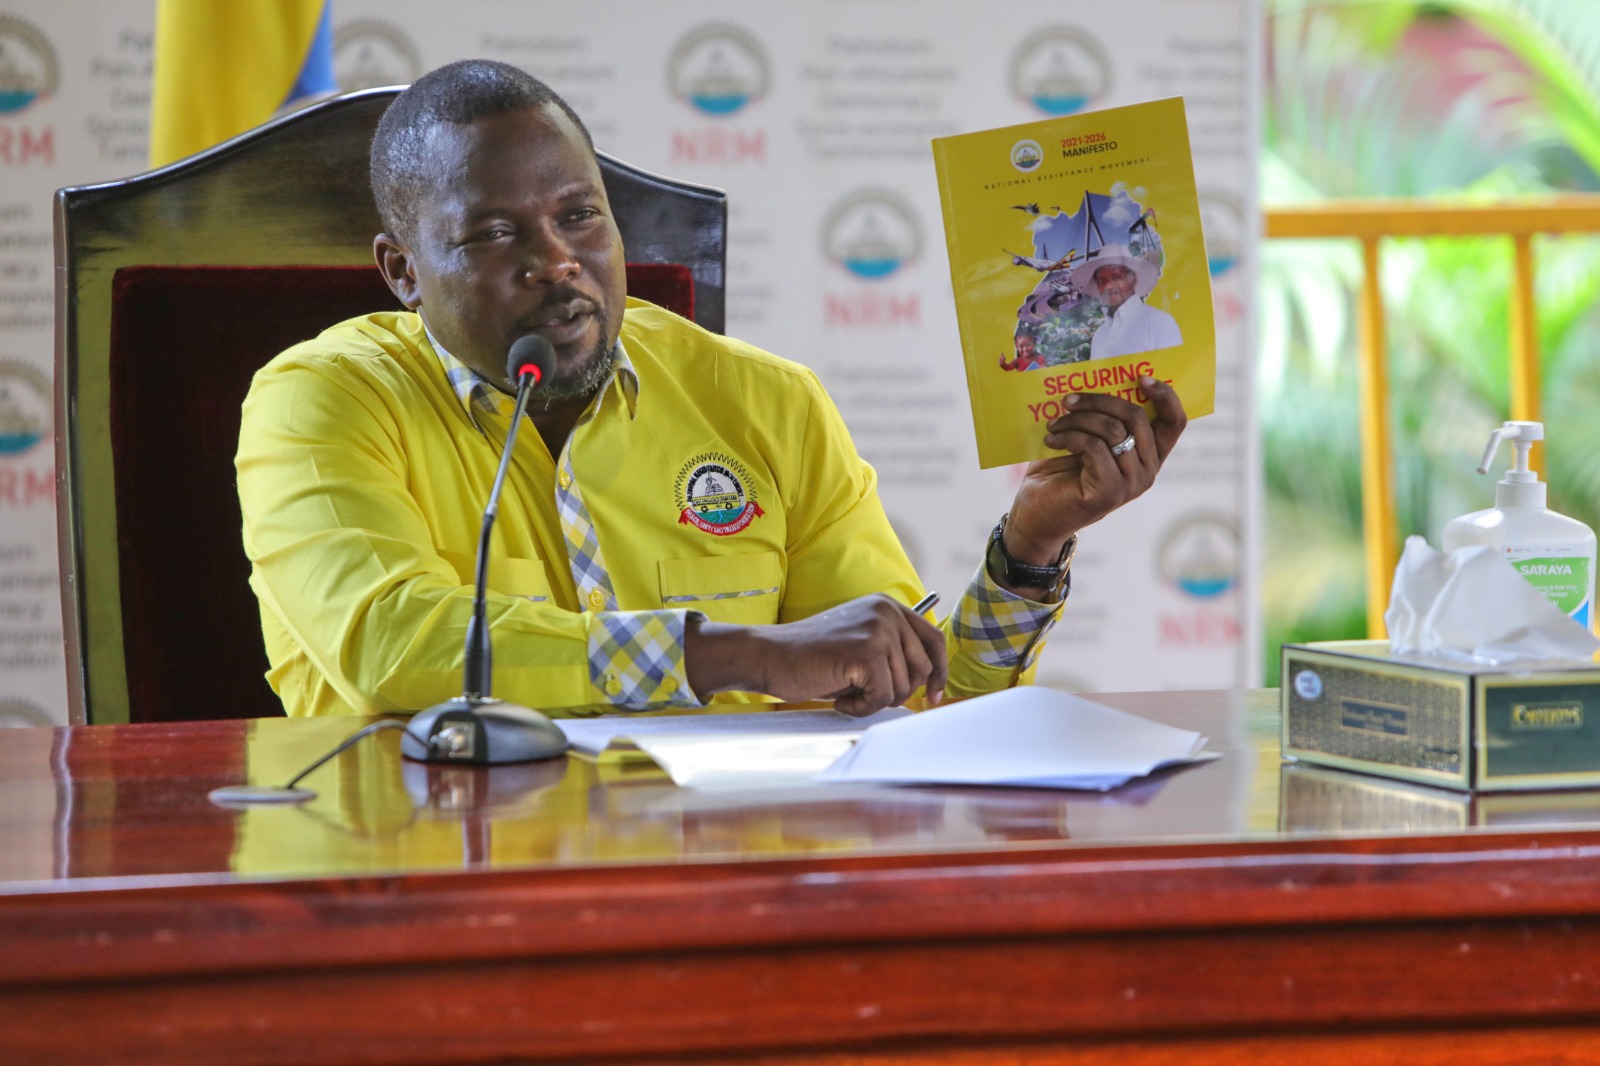 NRM gears up for 2026 elections